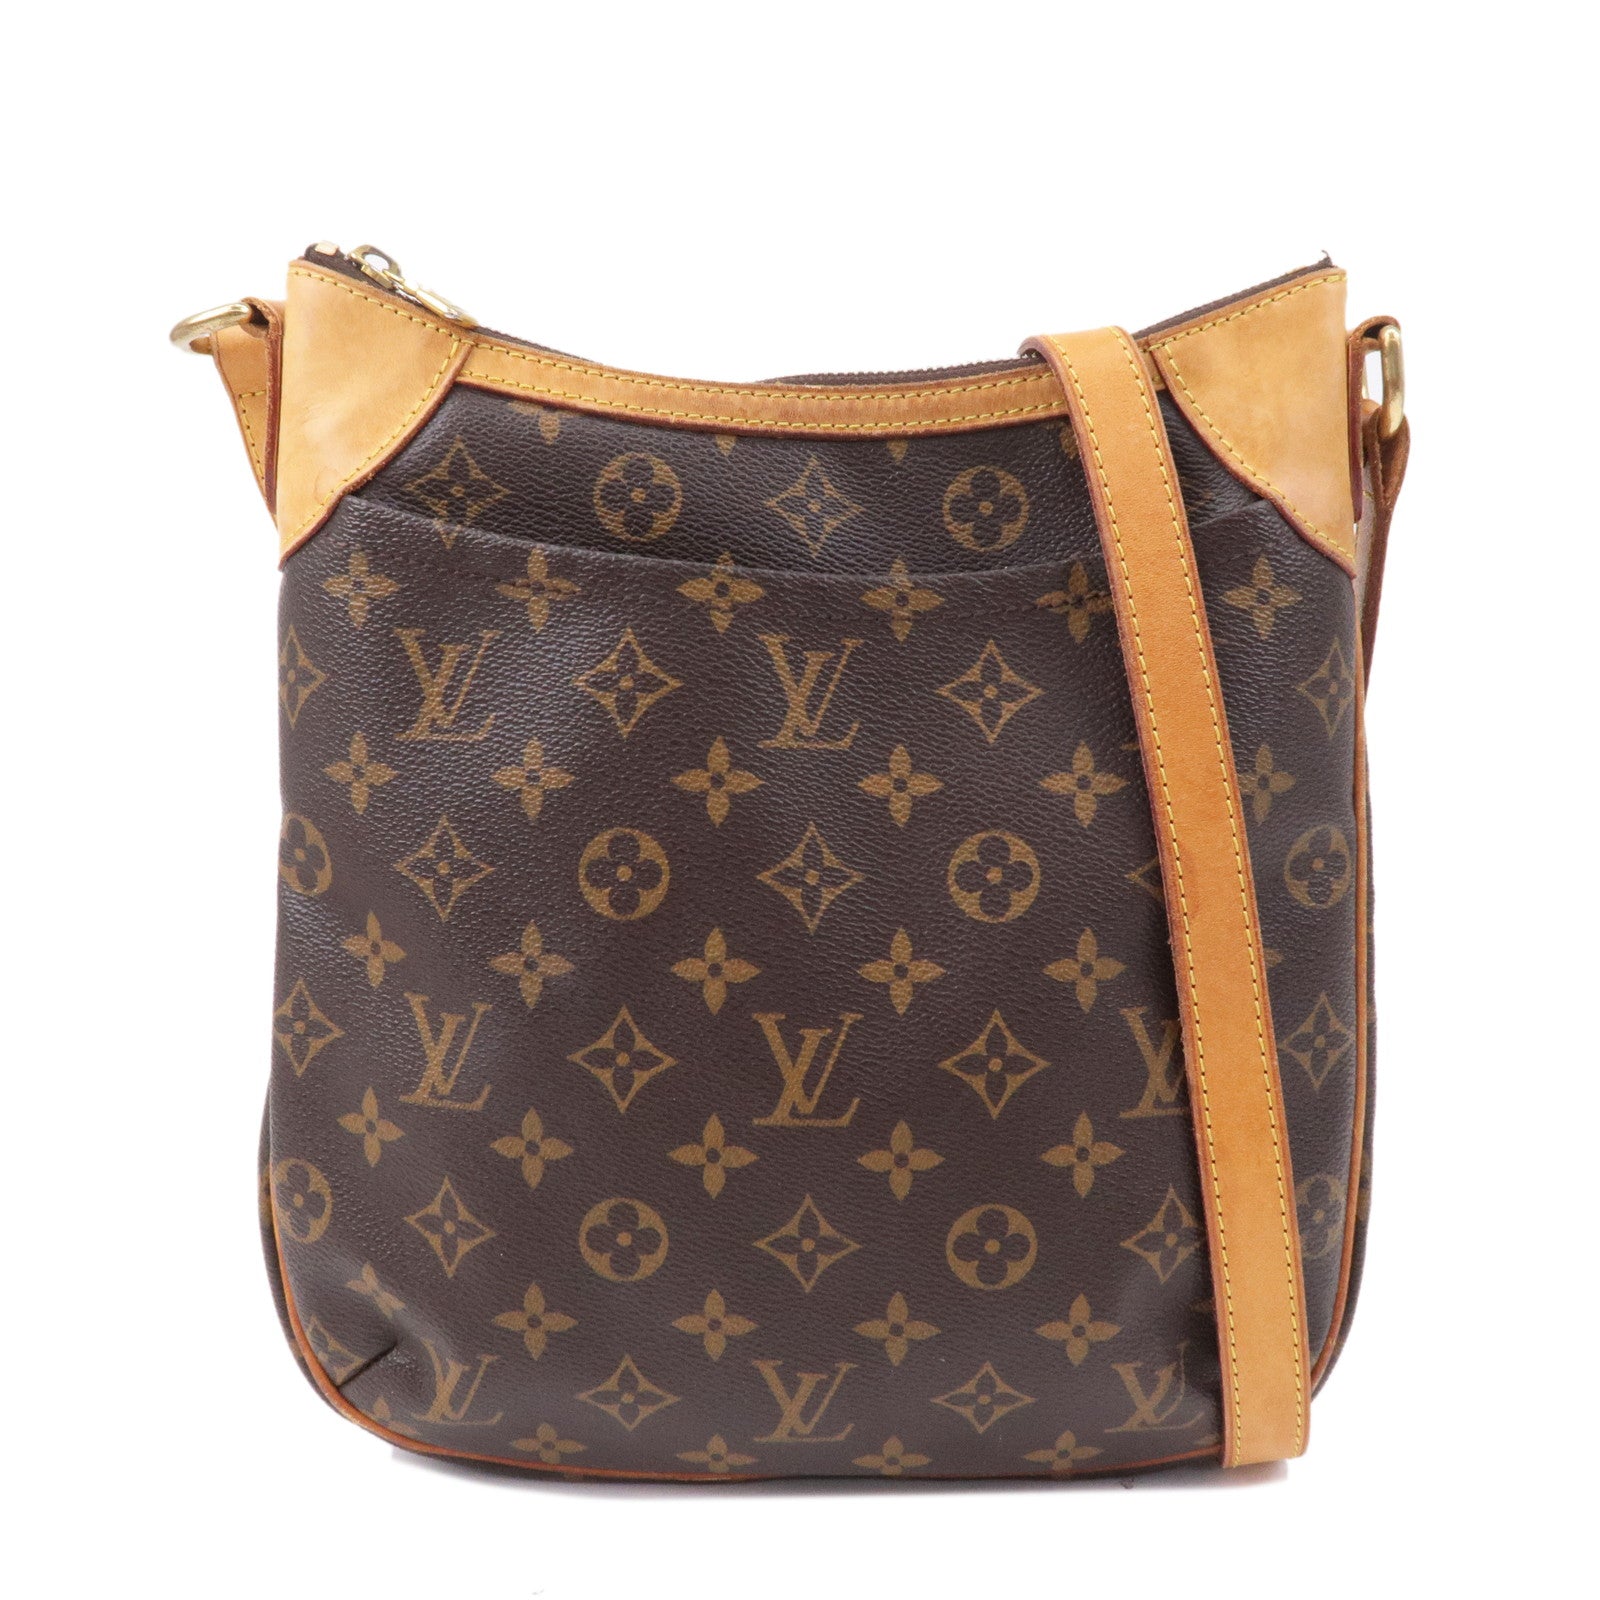 LV Odeon Tote PM vs Speedy B 25 : Which one is your favorite? 